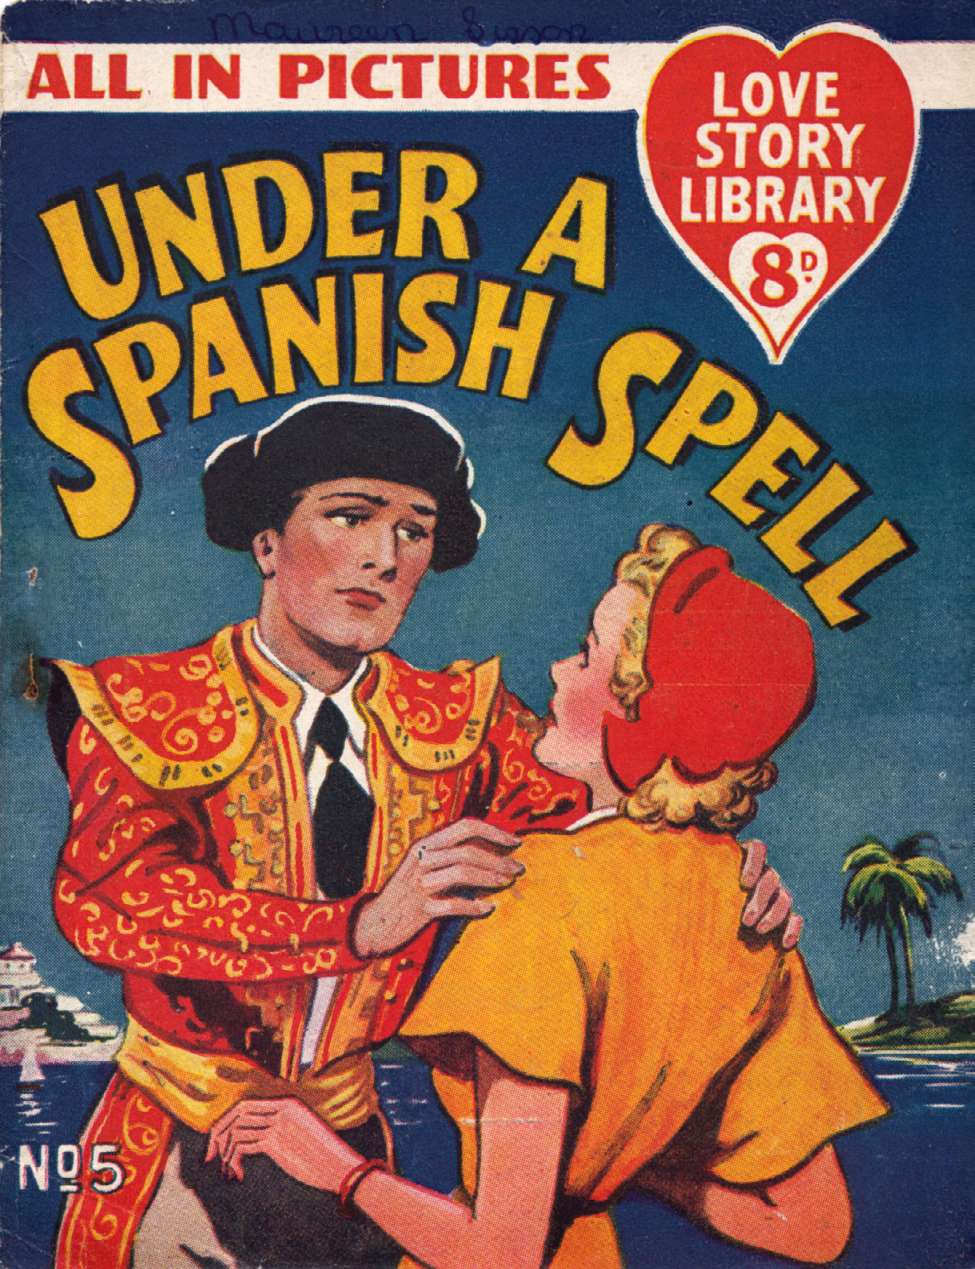 Book Cover For Love Story Picture Library 5 - Under A Spanish Spell